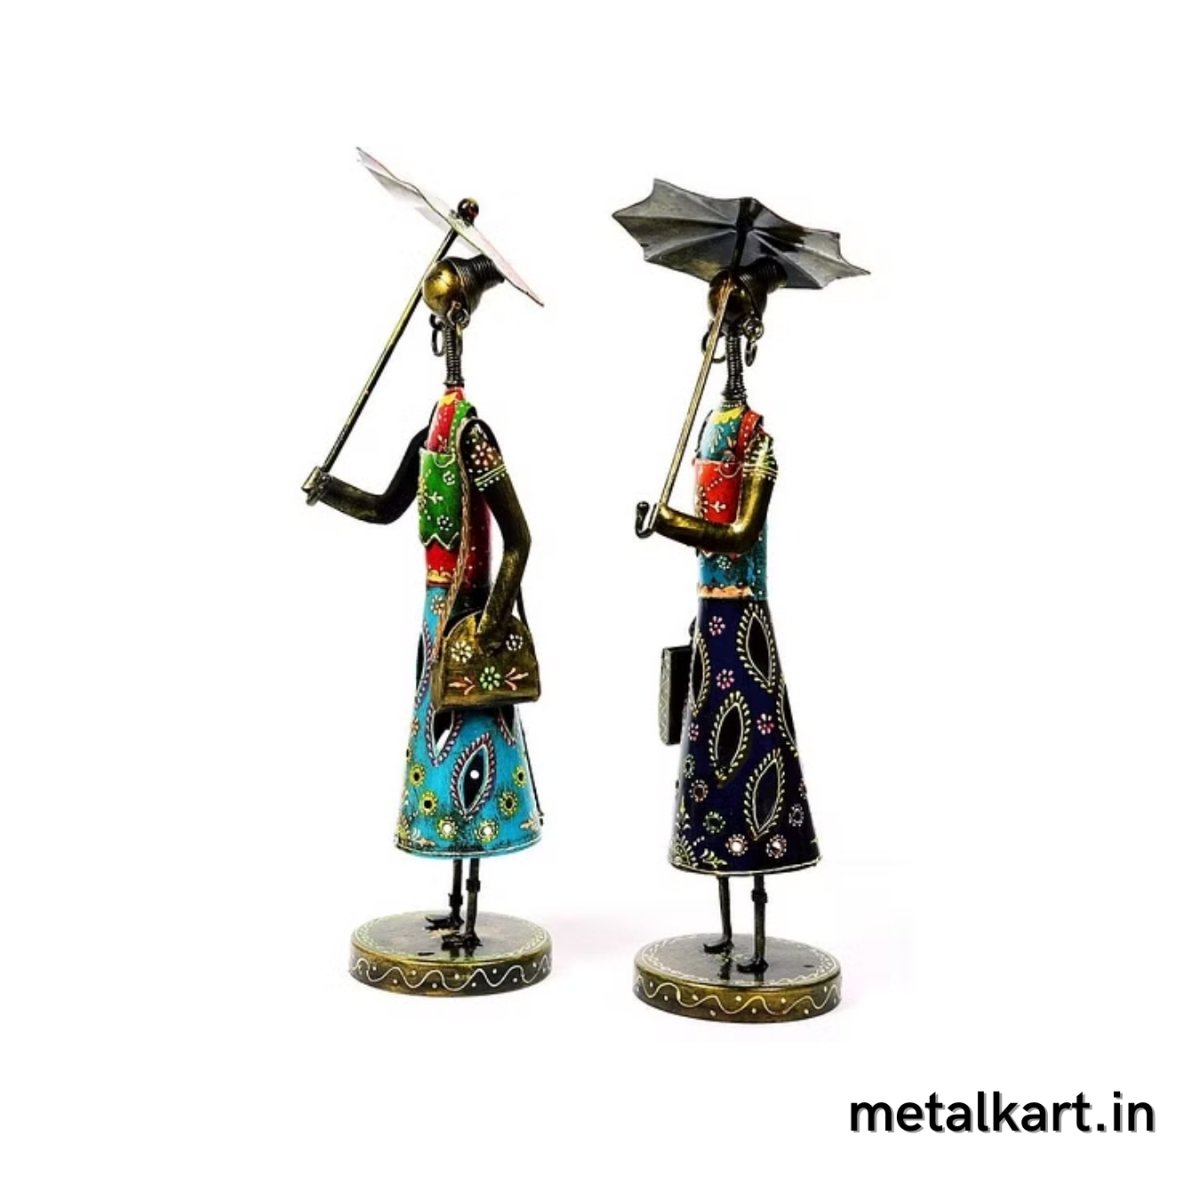 Handcrafted Japanese Ladies with Traditional Umbrella Set of 2 (15*4*4 Inches)